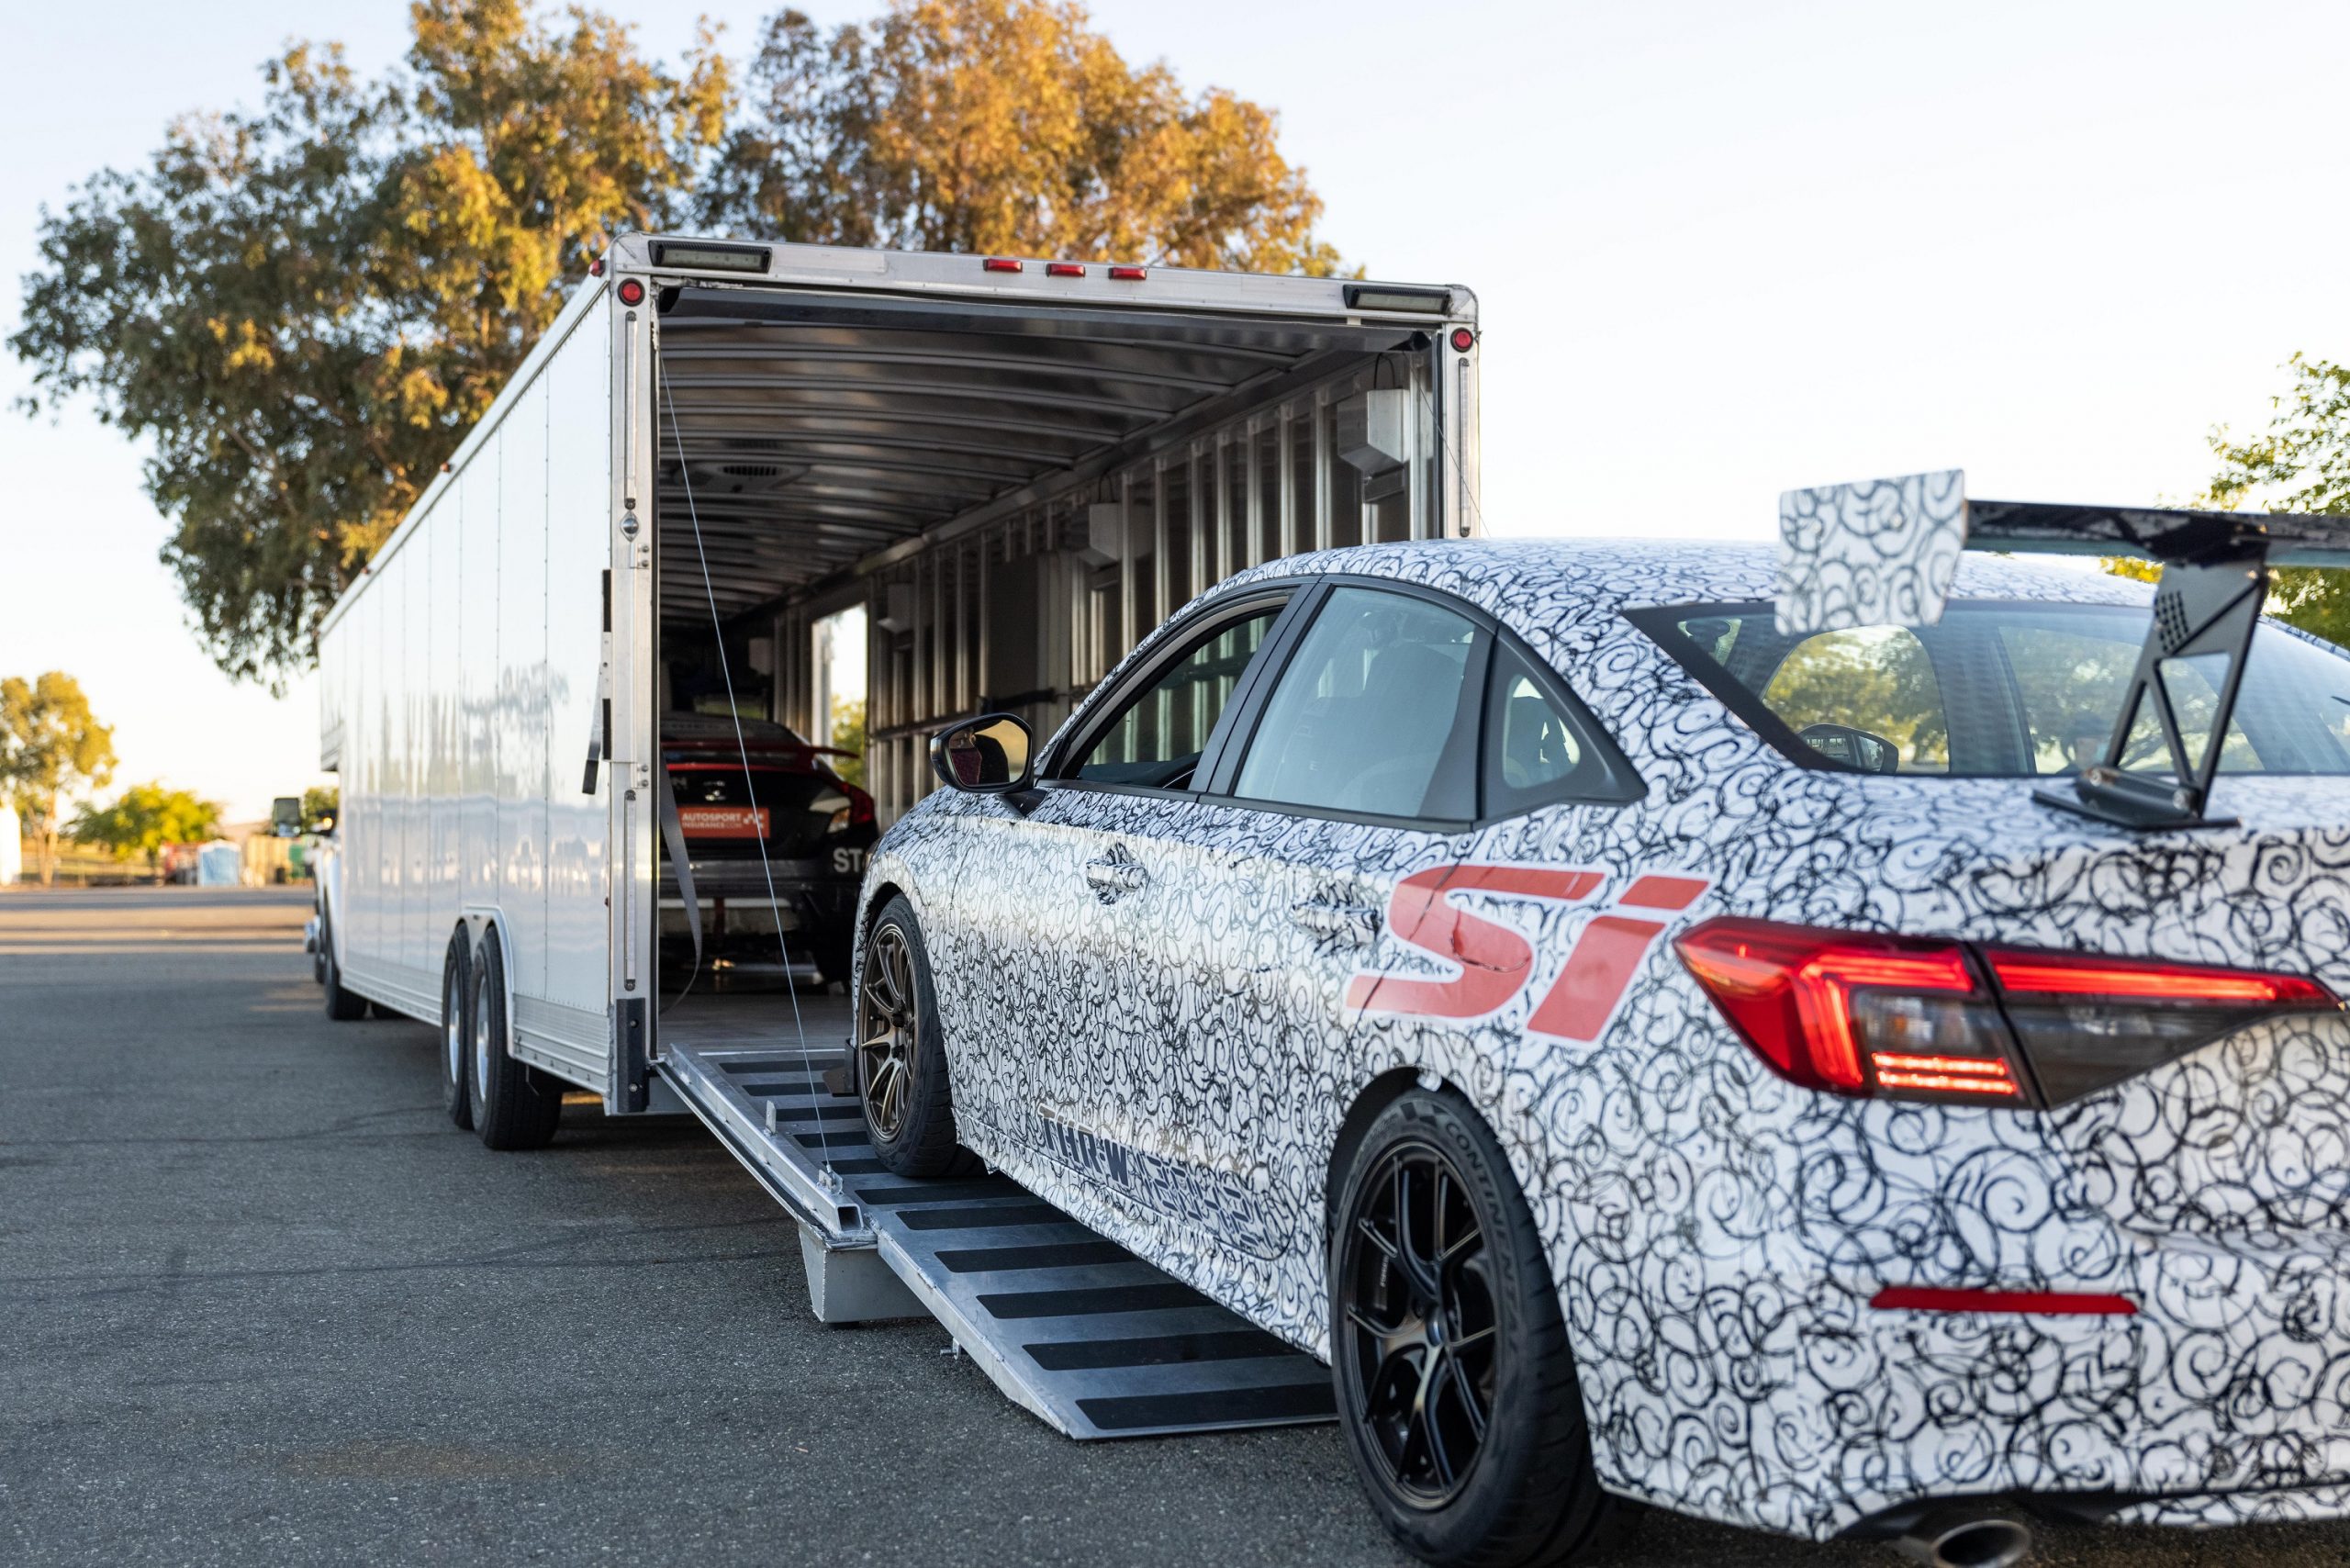 The 2022 Honda Civic Si gets loaded onto a trailer 